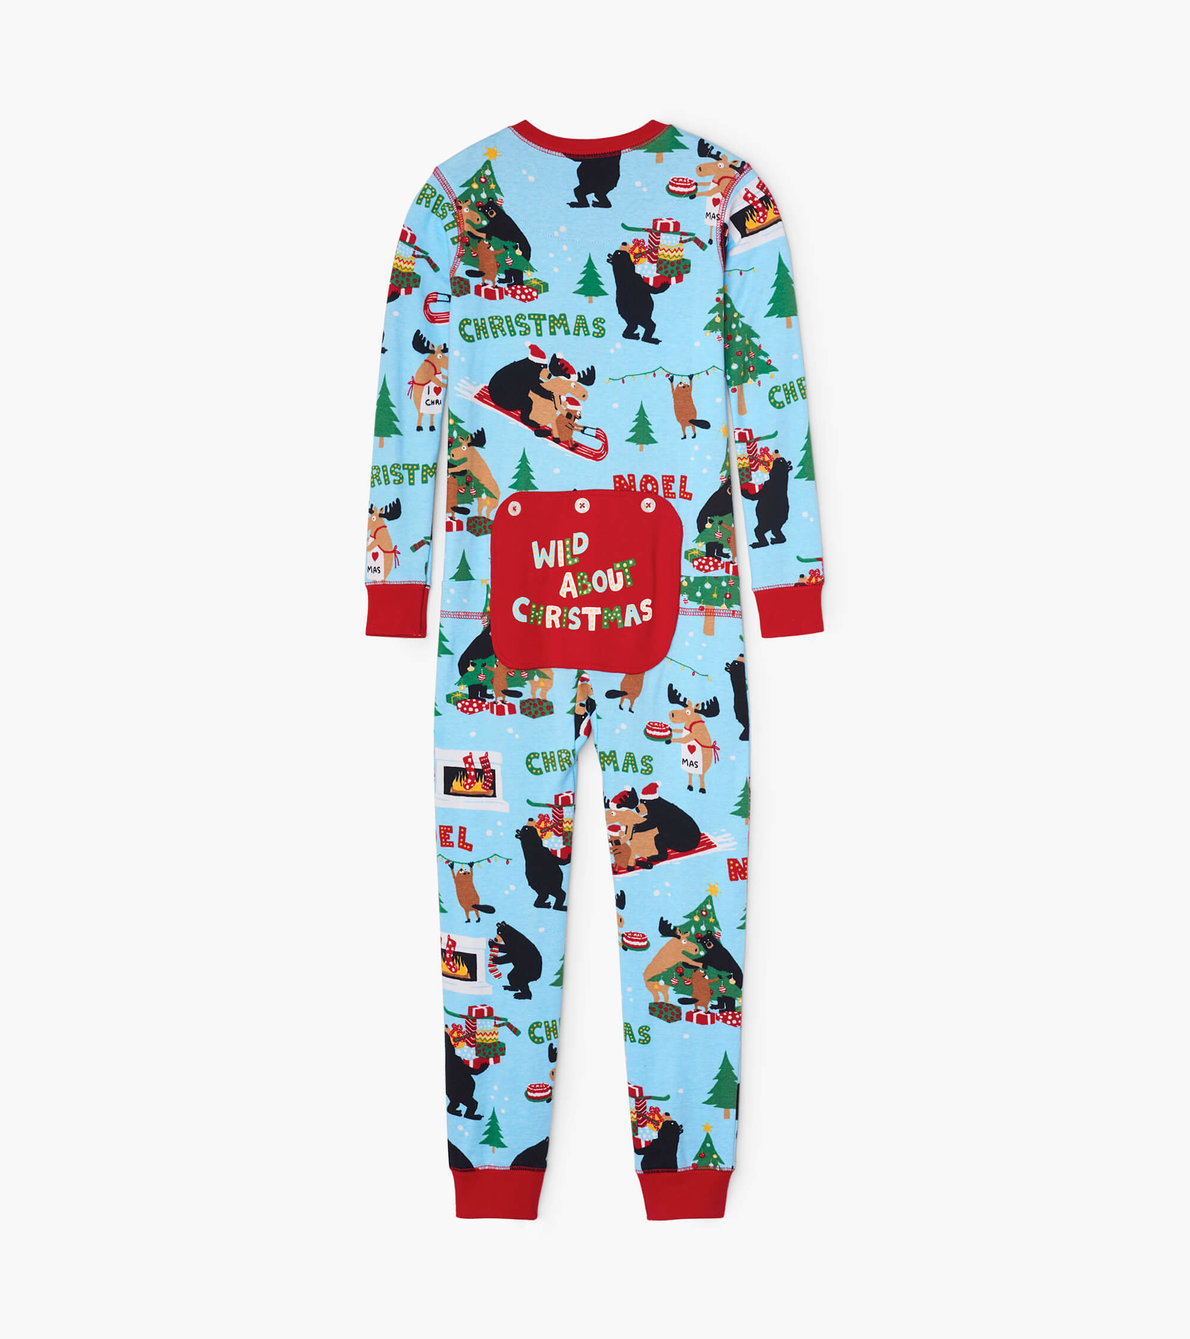 View larger image of Wild About Christmas Kids Union Suit